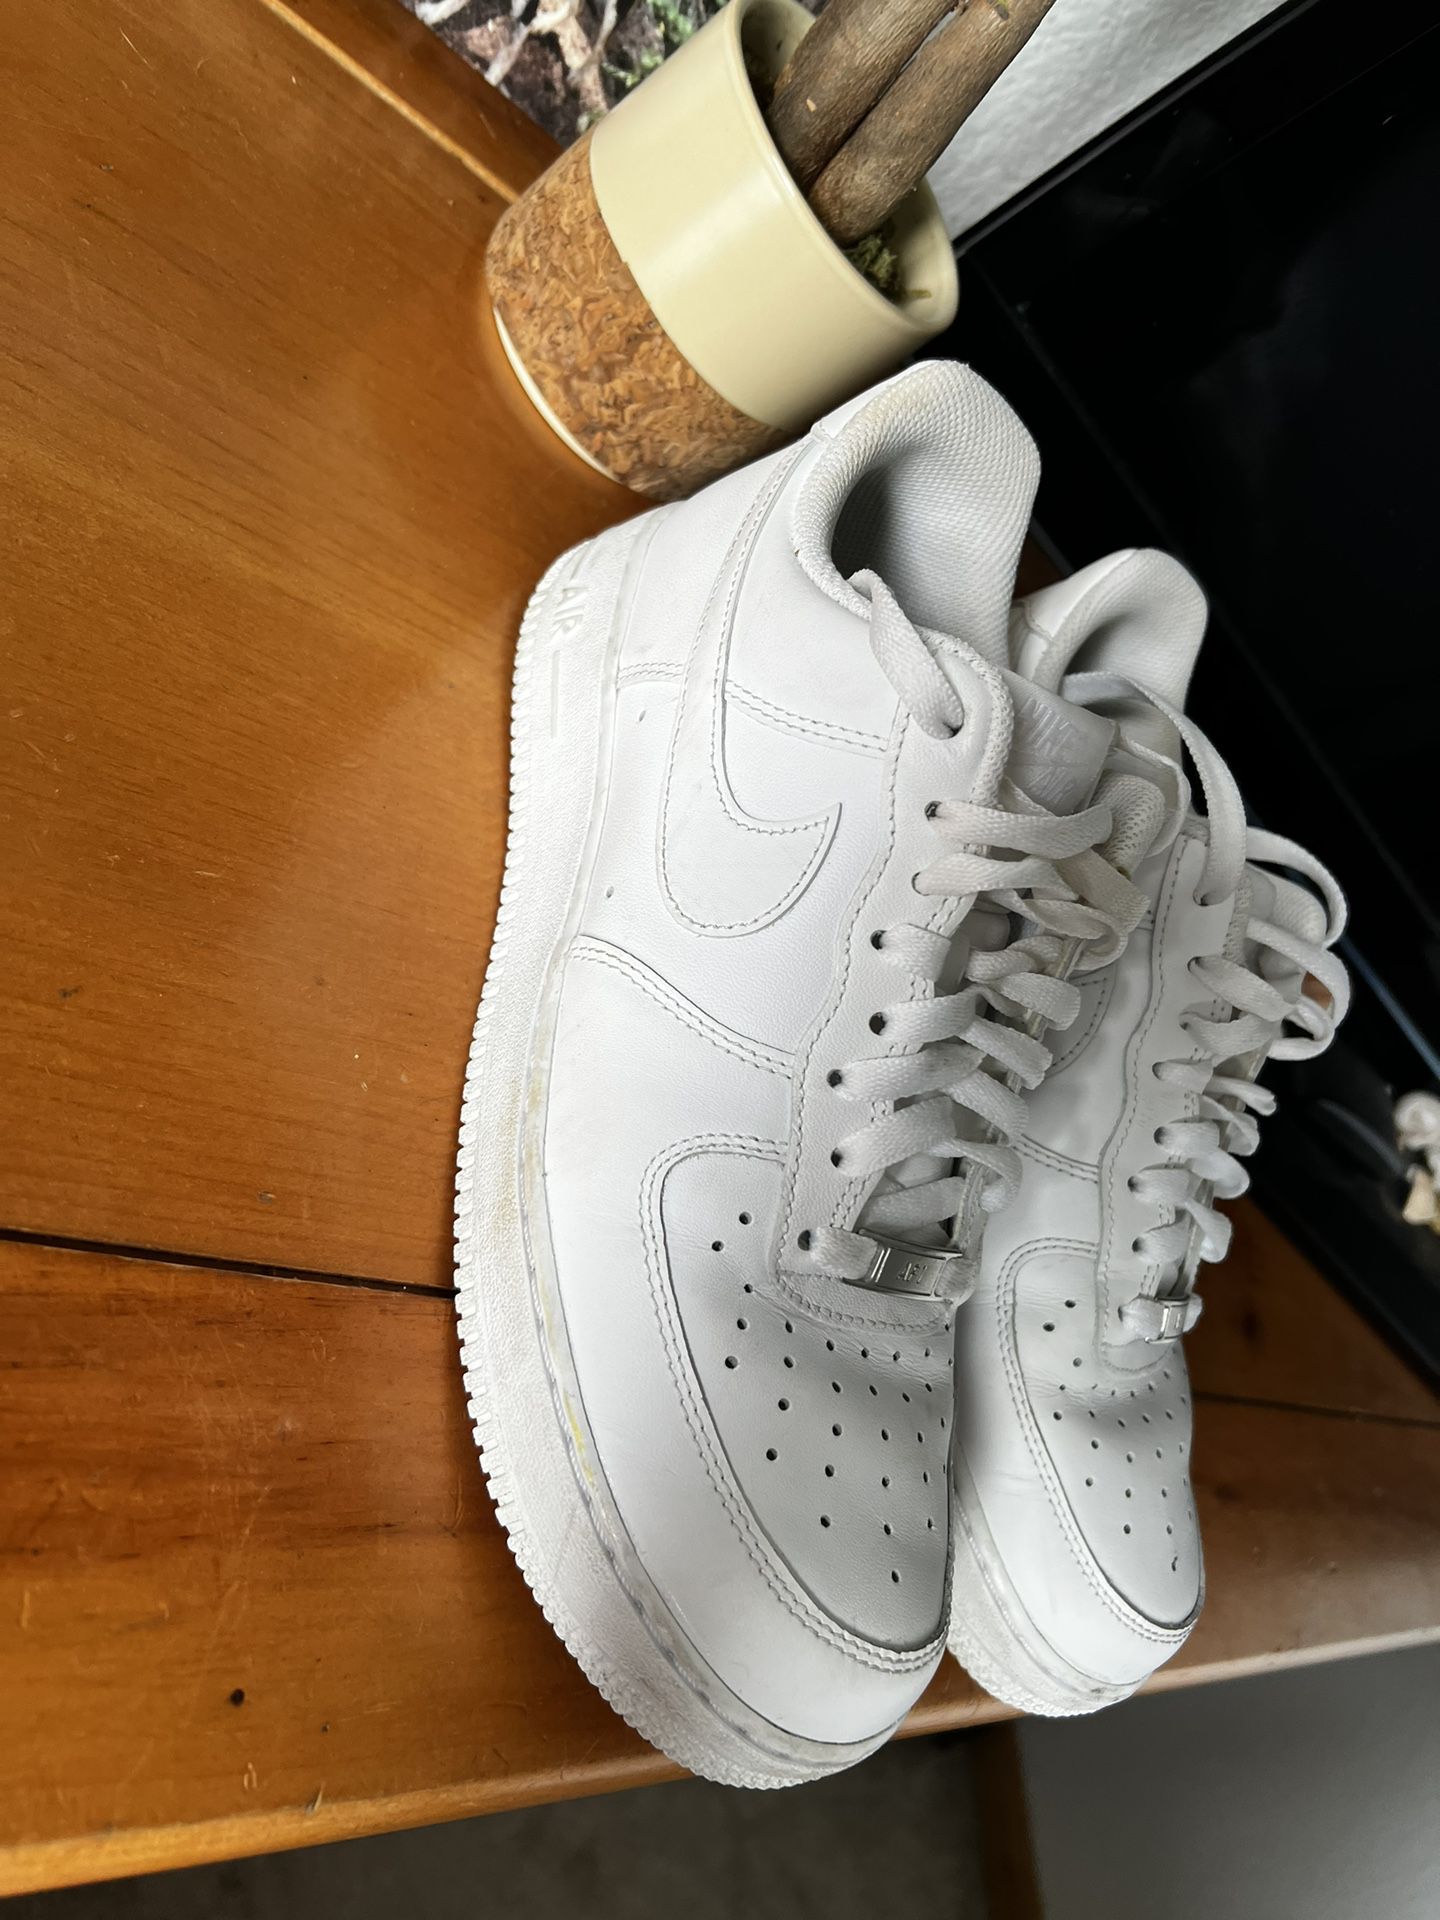 LV Air Force One Size 8.5 for Sale in Vancouver, WA - OfferUp